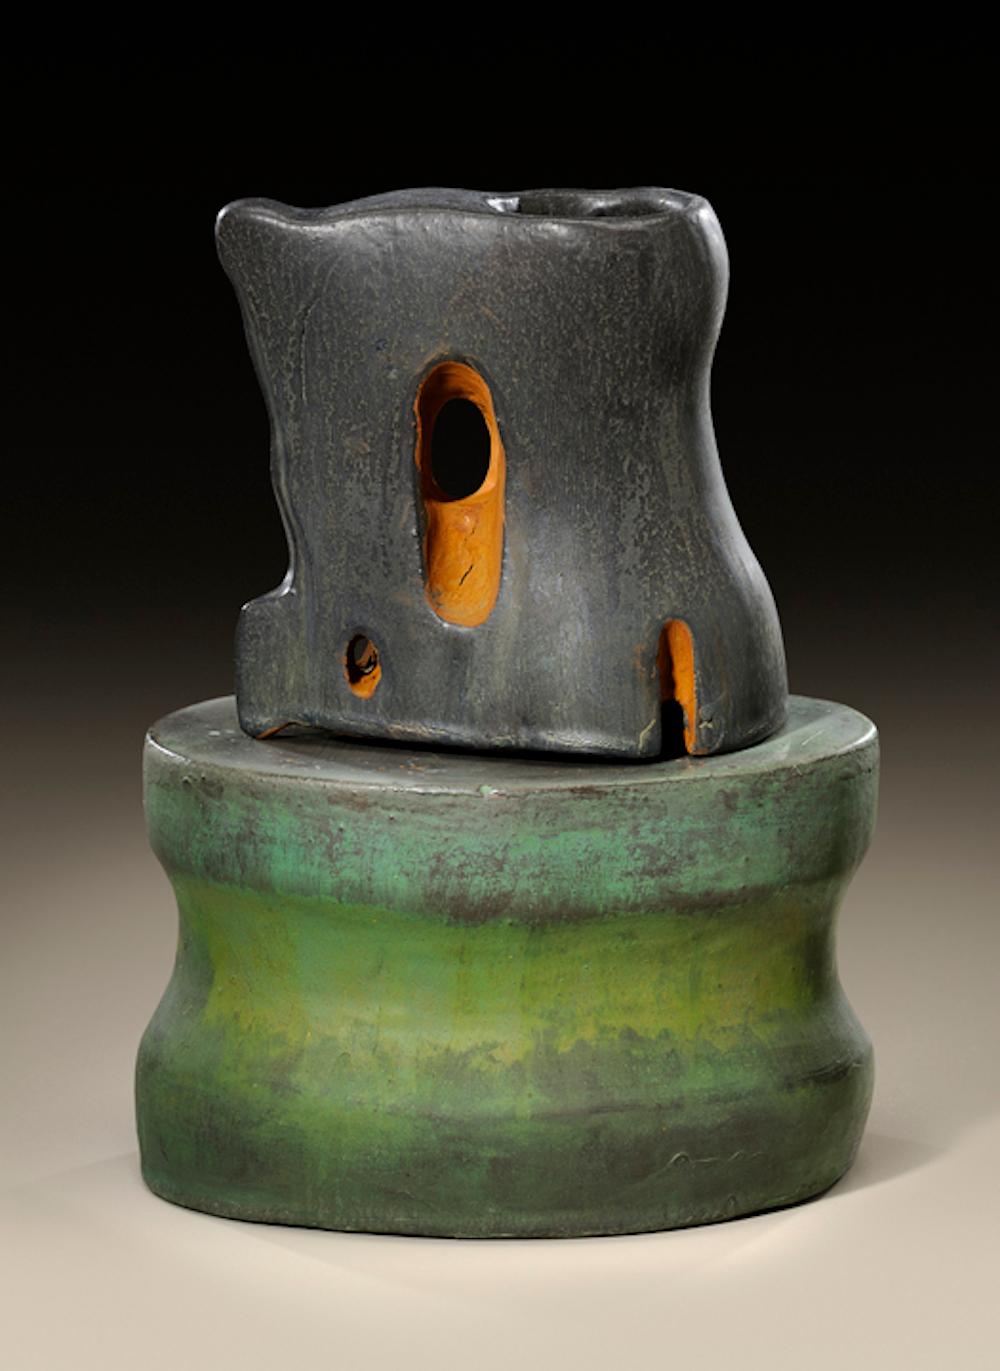 Richard Hirsch Ceramic Scholar Rock Cup Sculpture, 2011 In Excellent Condition For Sale In New York, NY